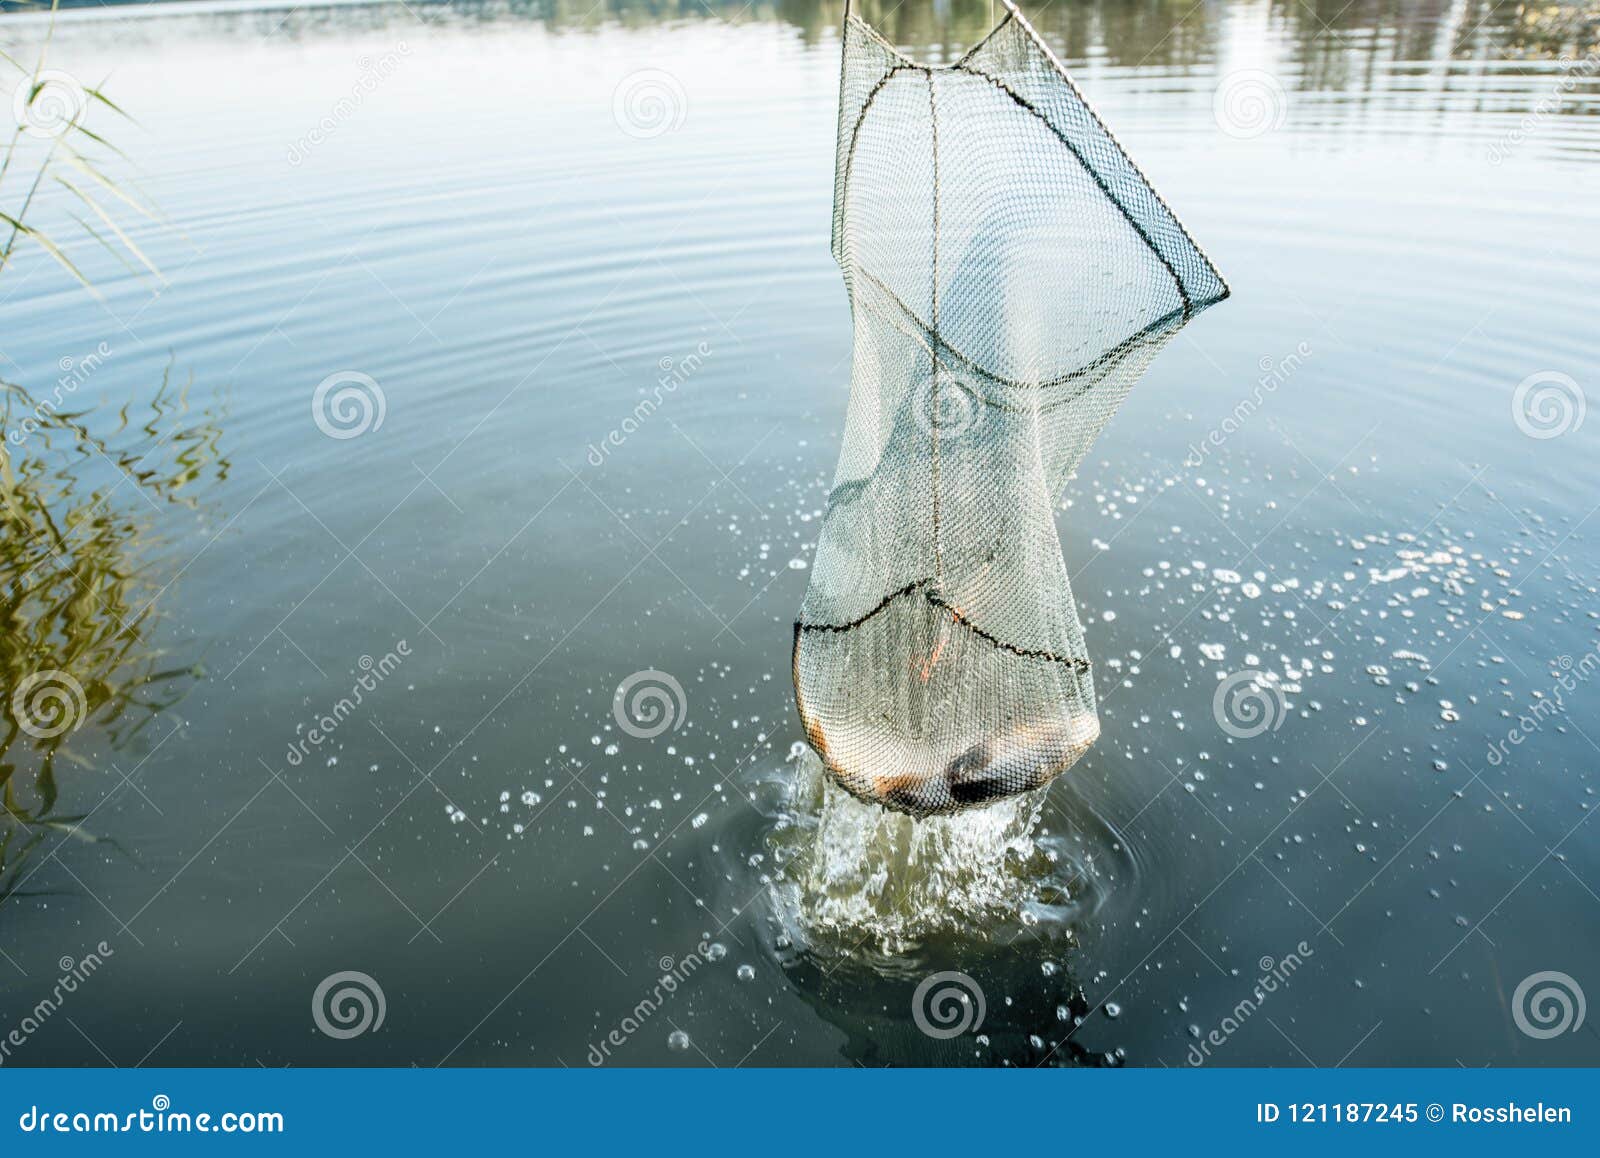 Catching fish with net stock image. Image of catching - 121187245